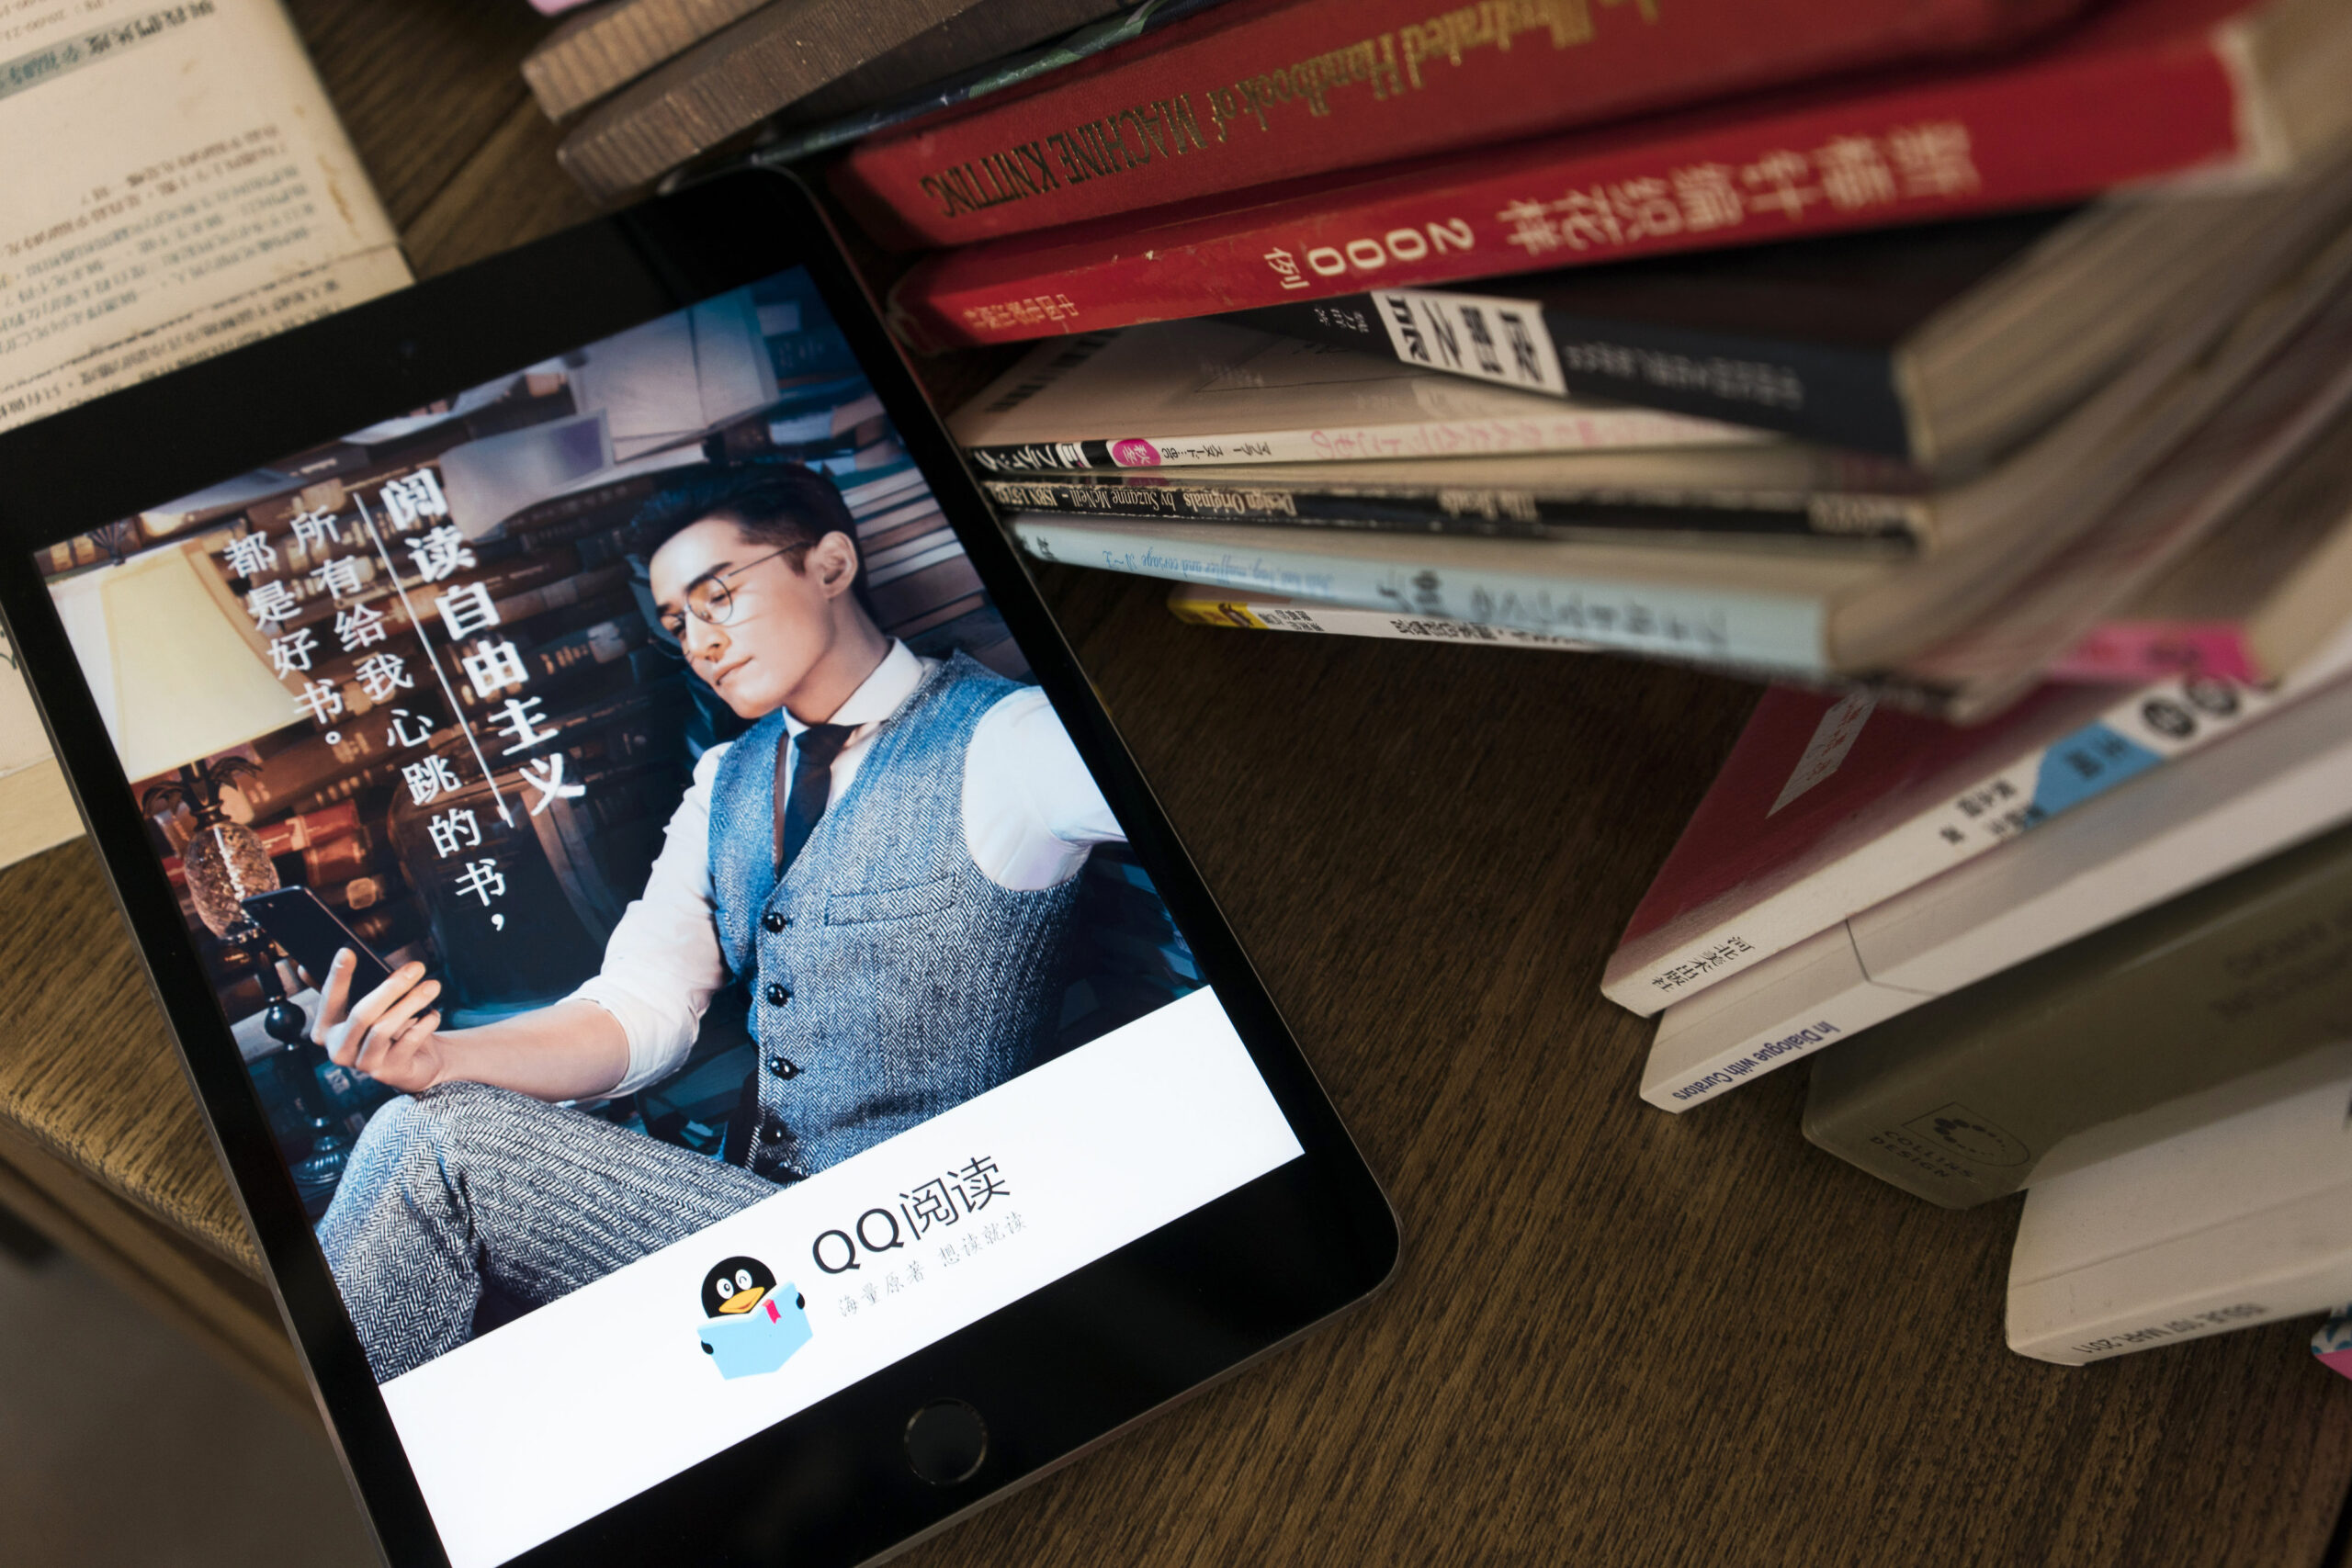 How is Chinese online literature selling overseas?